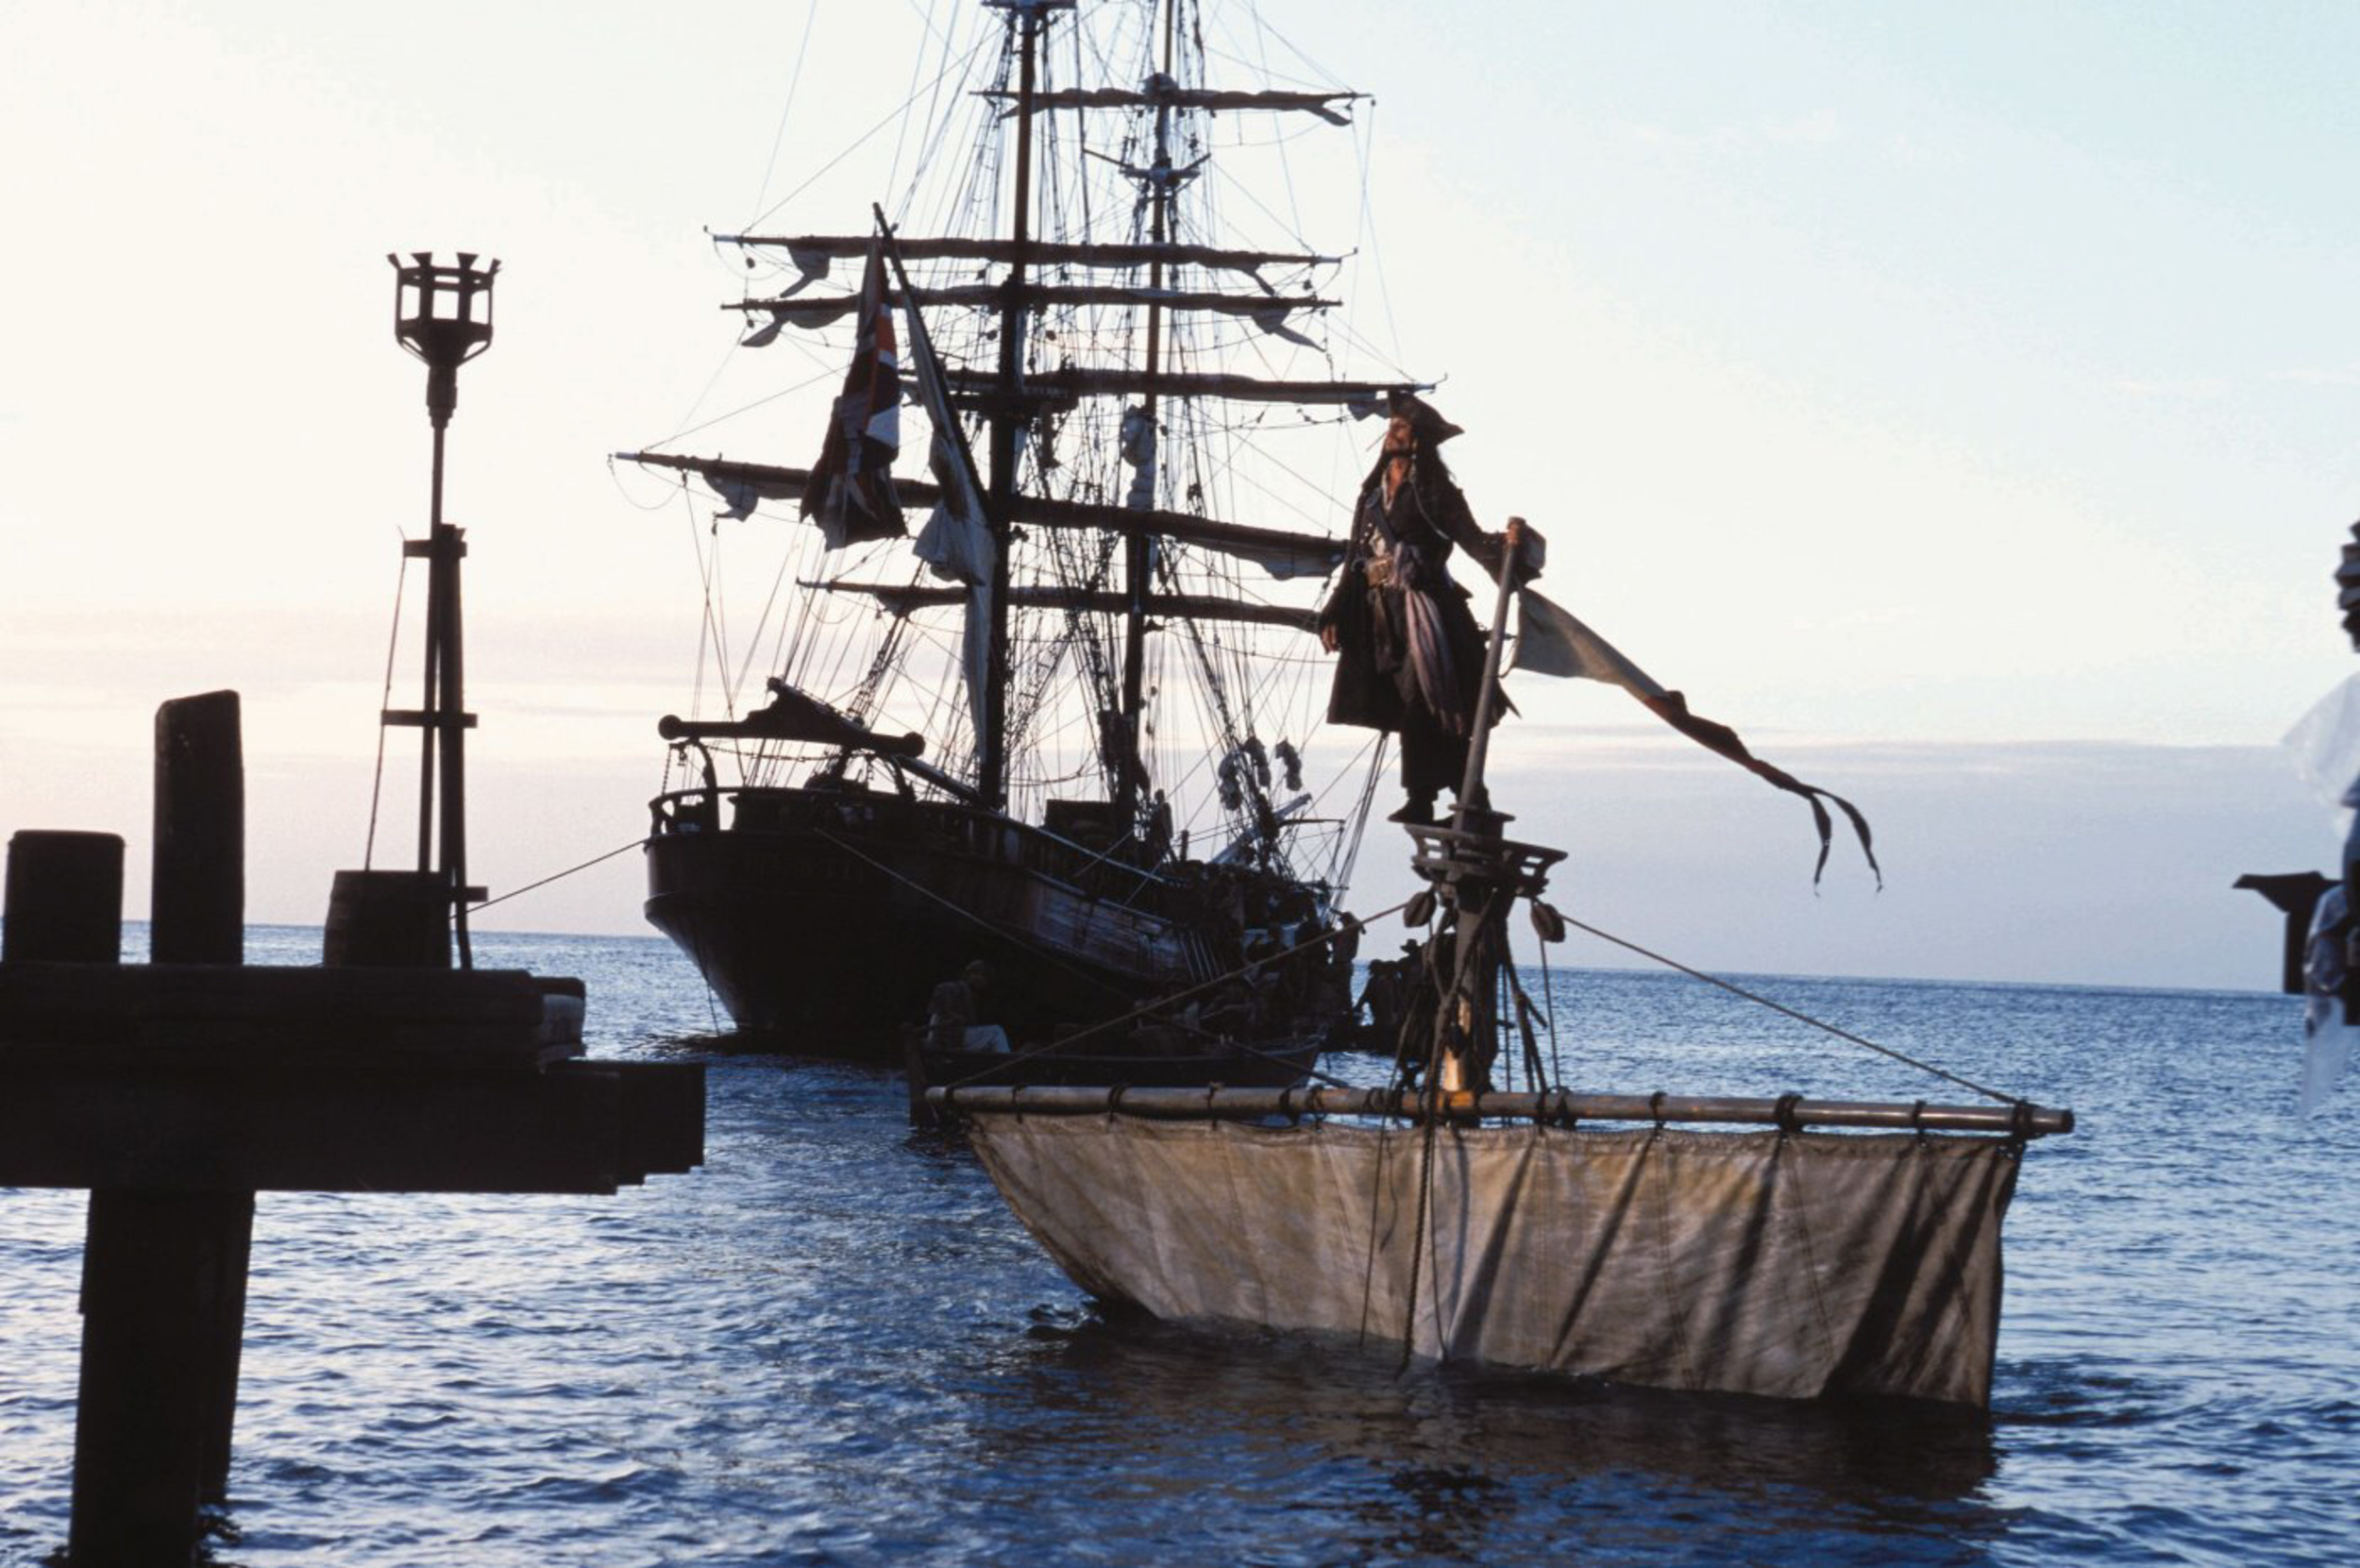 <p>To find a location to serve as Tortuga and Port Royal, the filming of <em>Curse of the Black Pearl</em> went down to the Caribbean. They settled on St. Vincent as the place to set up shop because there they found the quietest beach that was available to film.</p><p>You may also like: <a href='https://www.yardbarker.com/entertainment/articles/the_20_best_movies_based_on_tv_shows_030524/s1__39199180'>The 20 best movies based on TV shows</a></p>